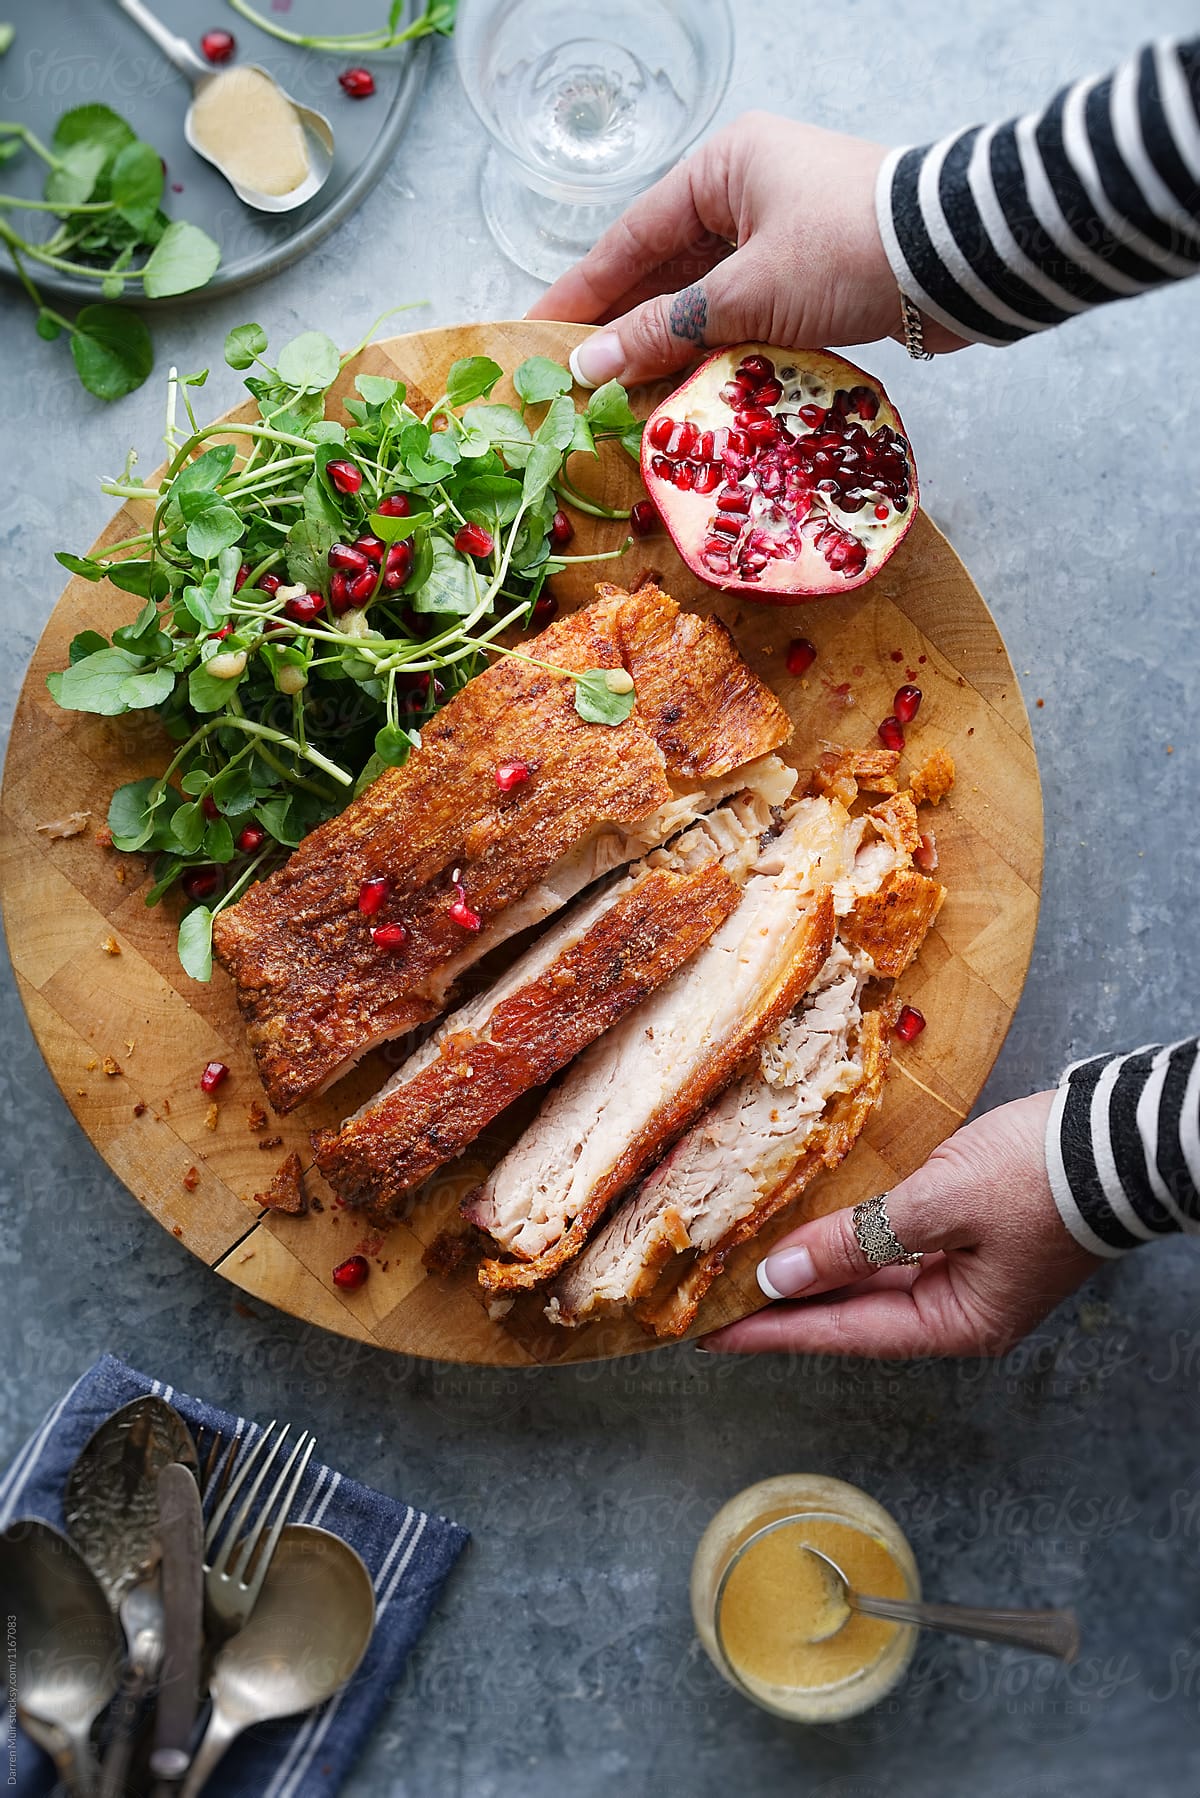 14 hours slow roasted pork belly with watercress and pomegranate salad.